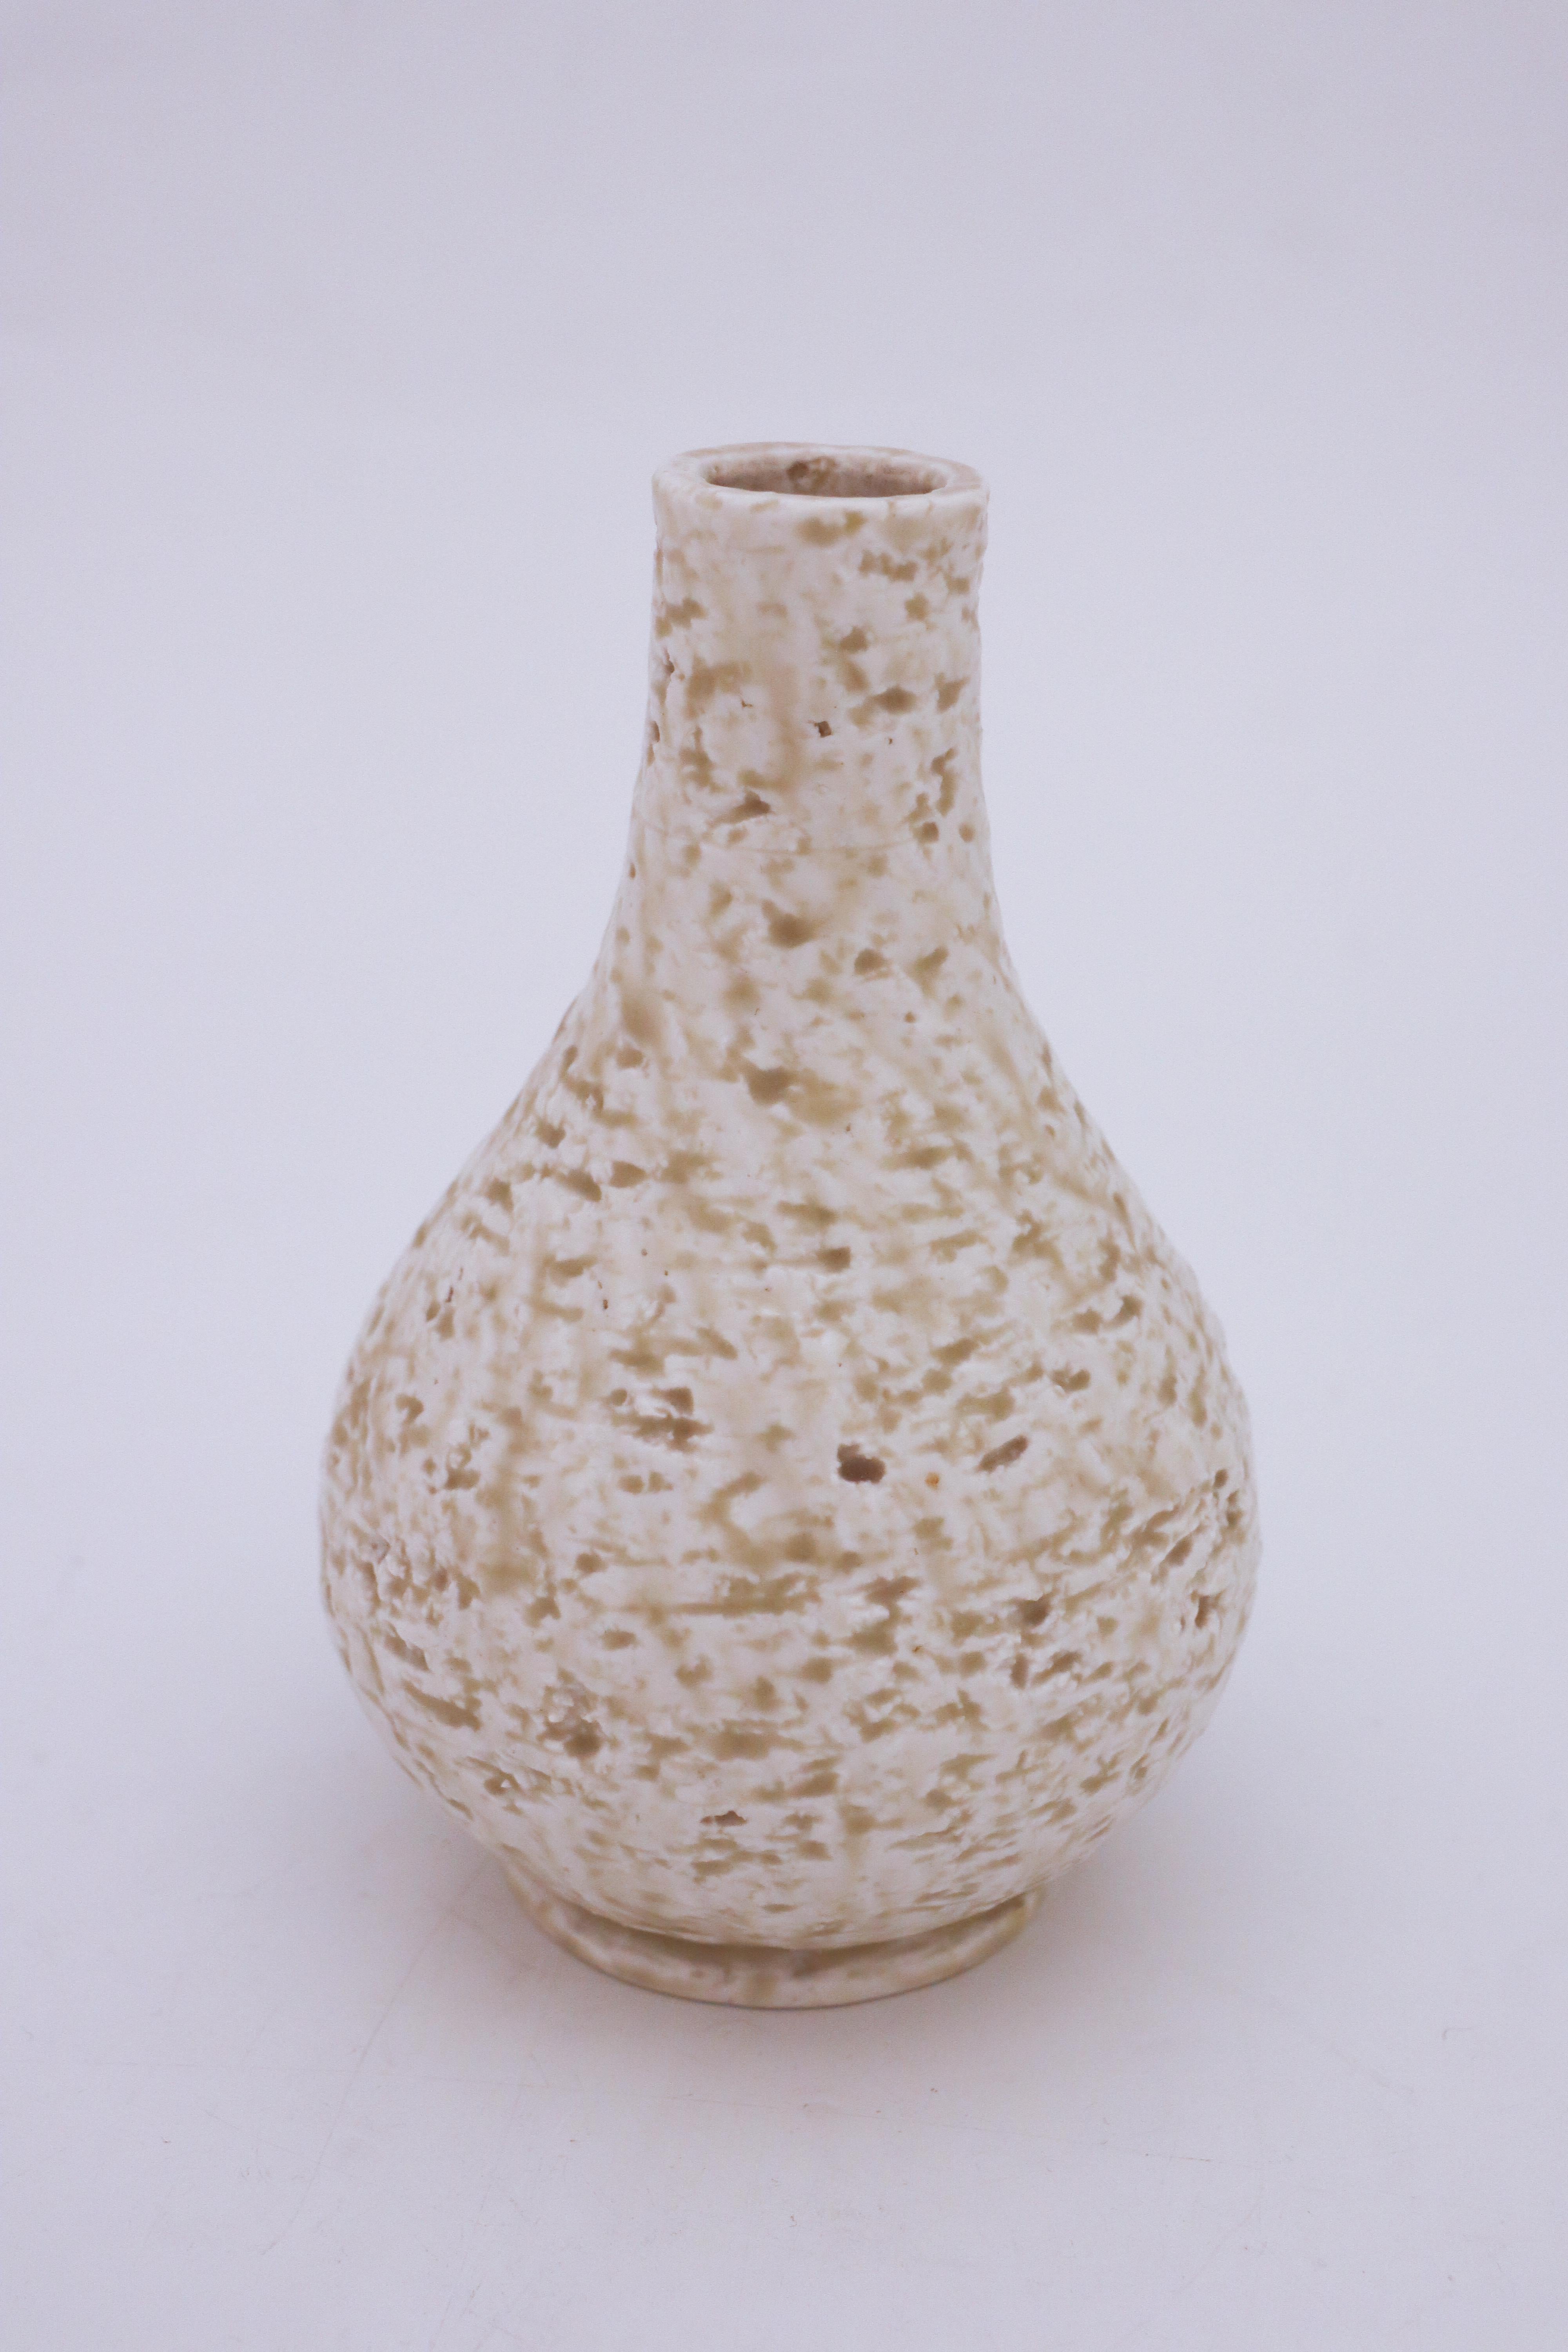 A vase designed by Gunnar Nylund at Rörstrand, the vase is 18.5 cm high and it is in very good condition except from some minor marks.

Gunnar Nylund was born in Paris 1904 with parents who worked as sculptors and designer so he really soon started